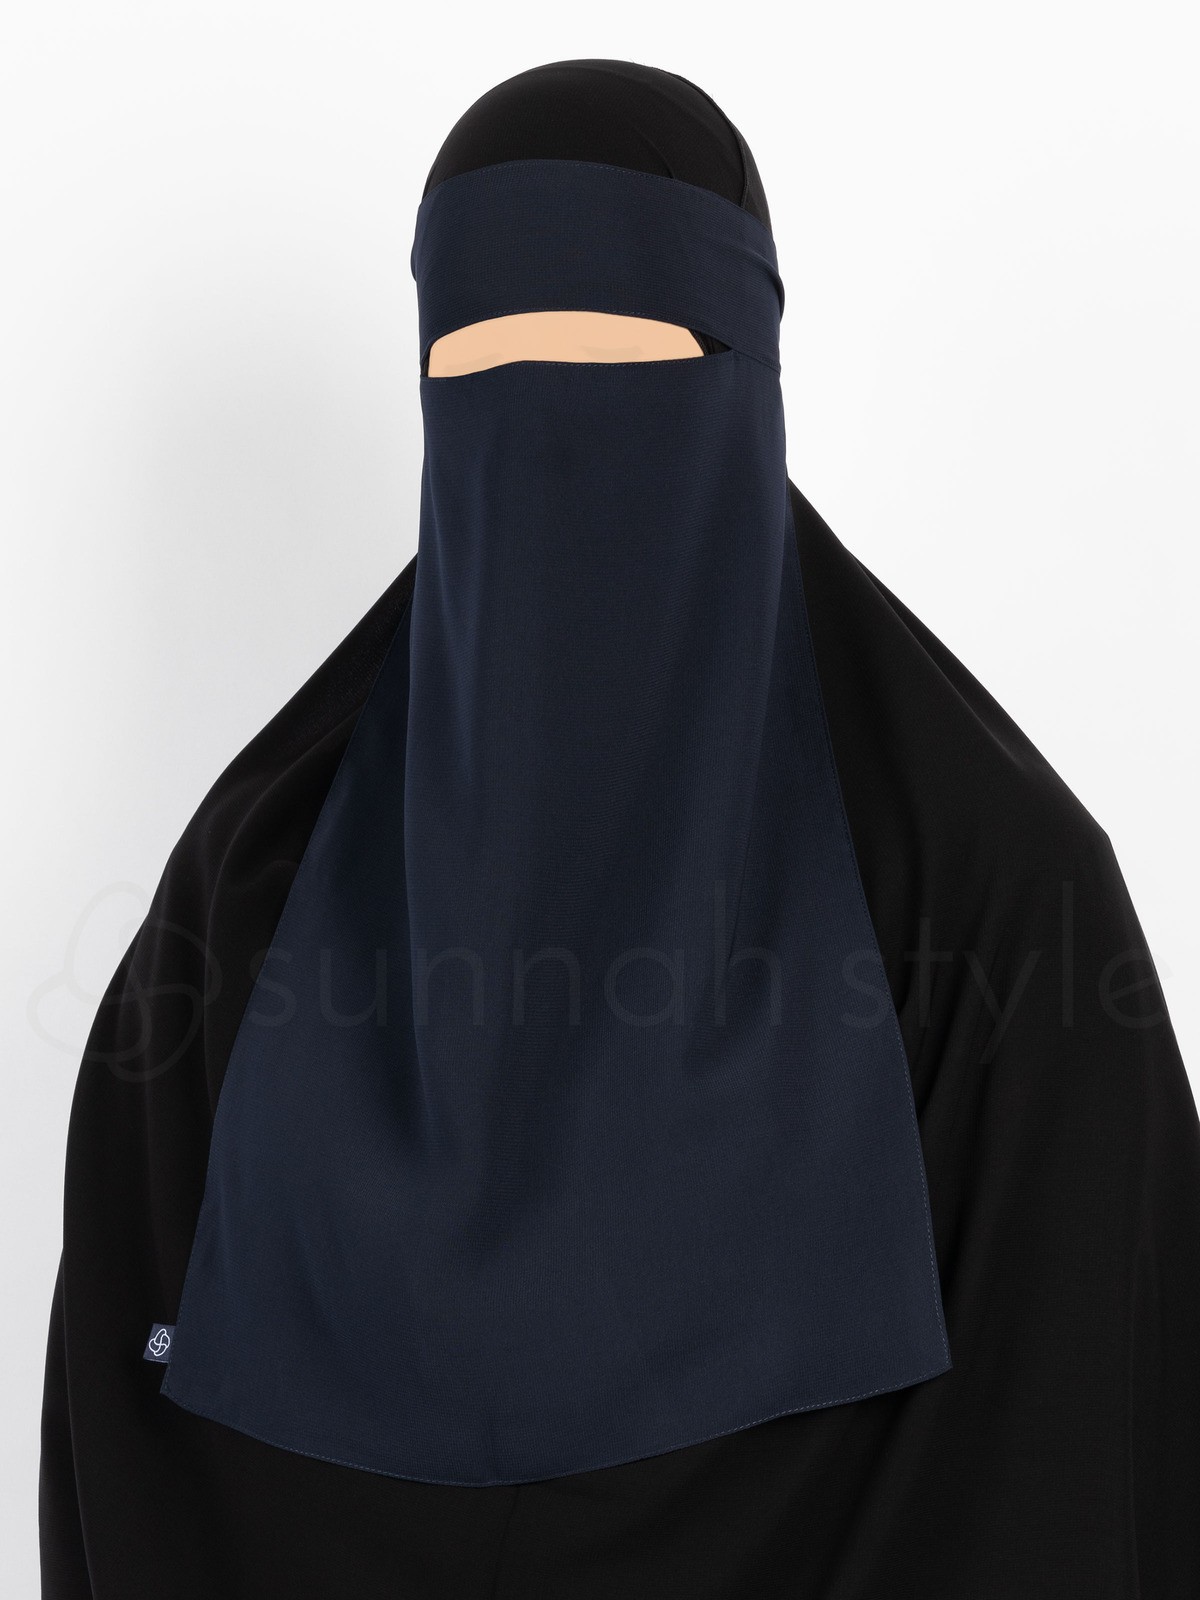 Sunnah Style - One Layer Niqab (Navy Blue)